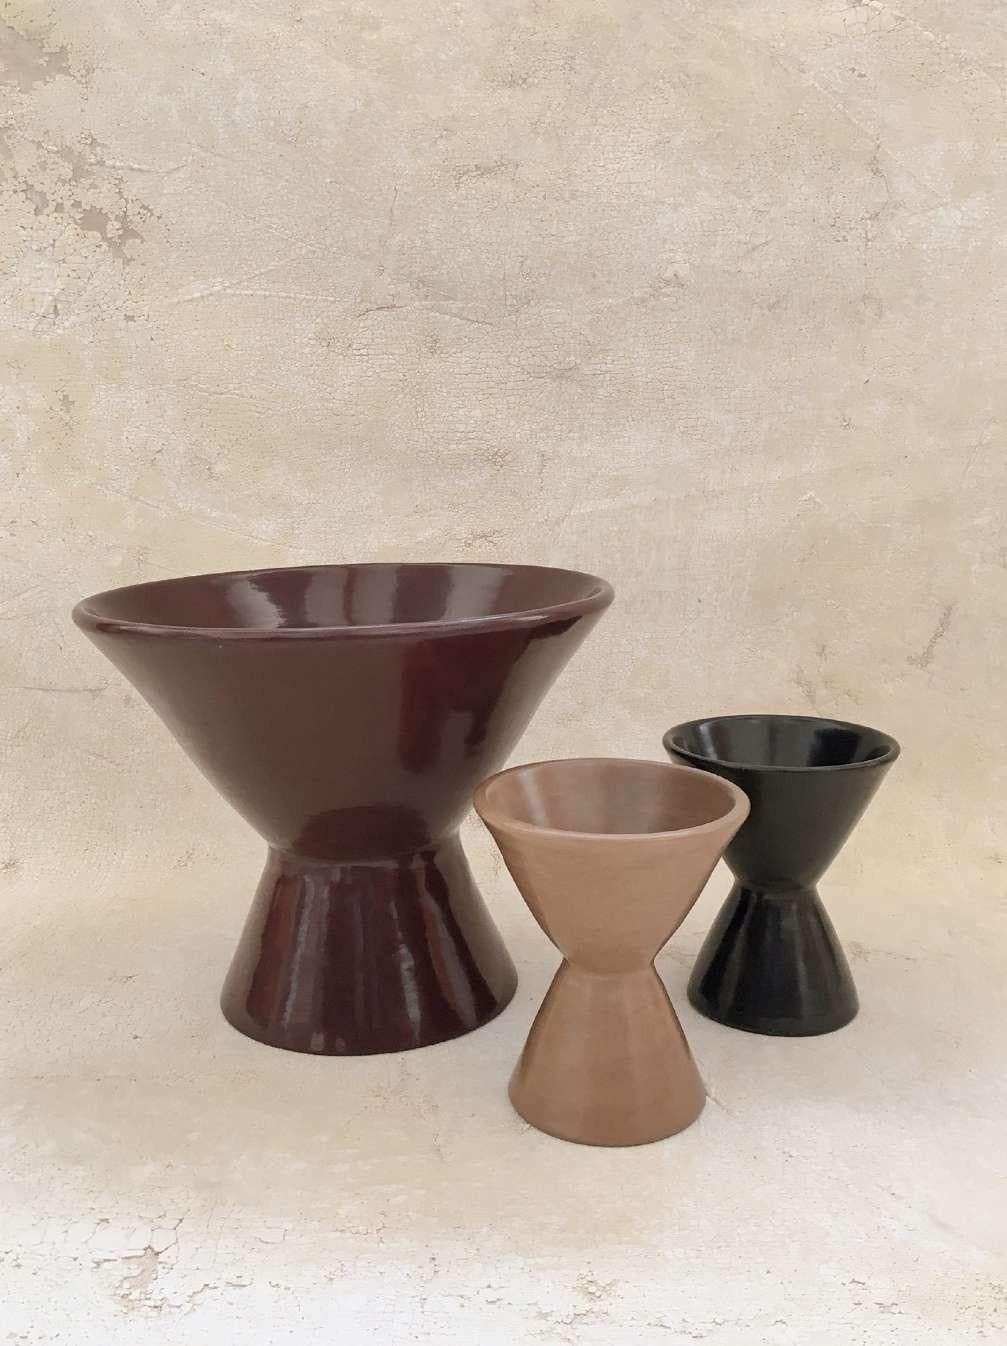 Tleyo Collection by Onora
Dimensions: D 30 x H 24 cm, D 25 x H 17 cm 
Materials: Clay

This collection reinterprets one of the oldest structural techniques in pottery, coiling, the vessels made with this technique are made from coils of clay